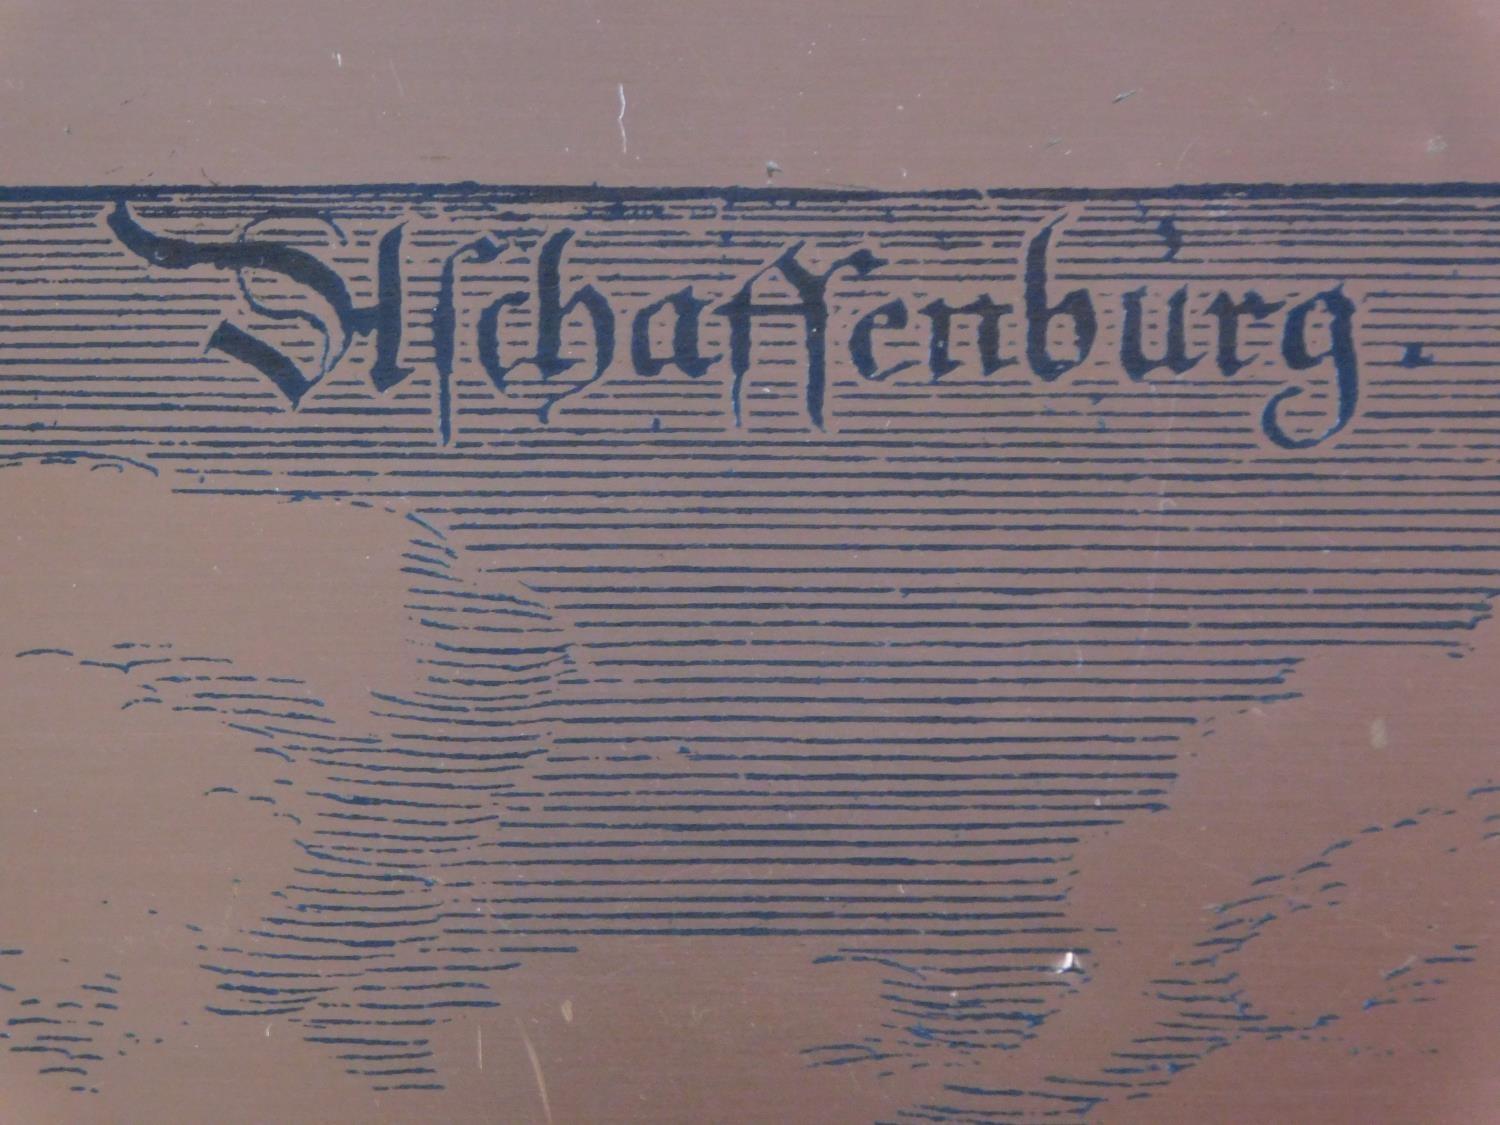 A vintage copper plate engraving of the German city of Aschaffenburg mounted on a wooden board. - Image 6 of 6